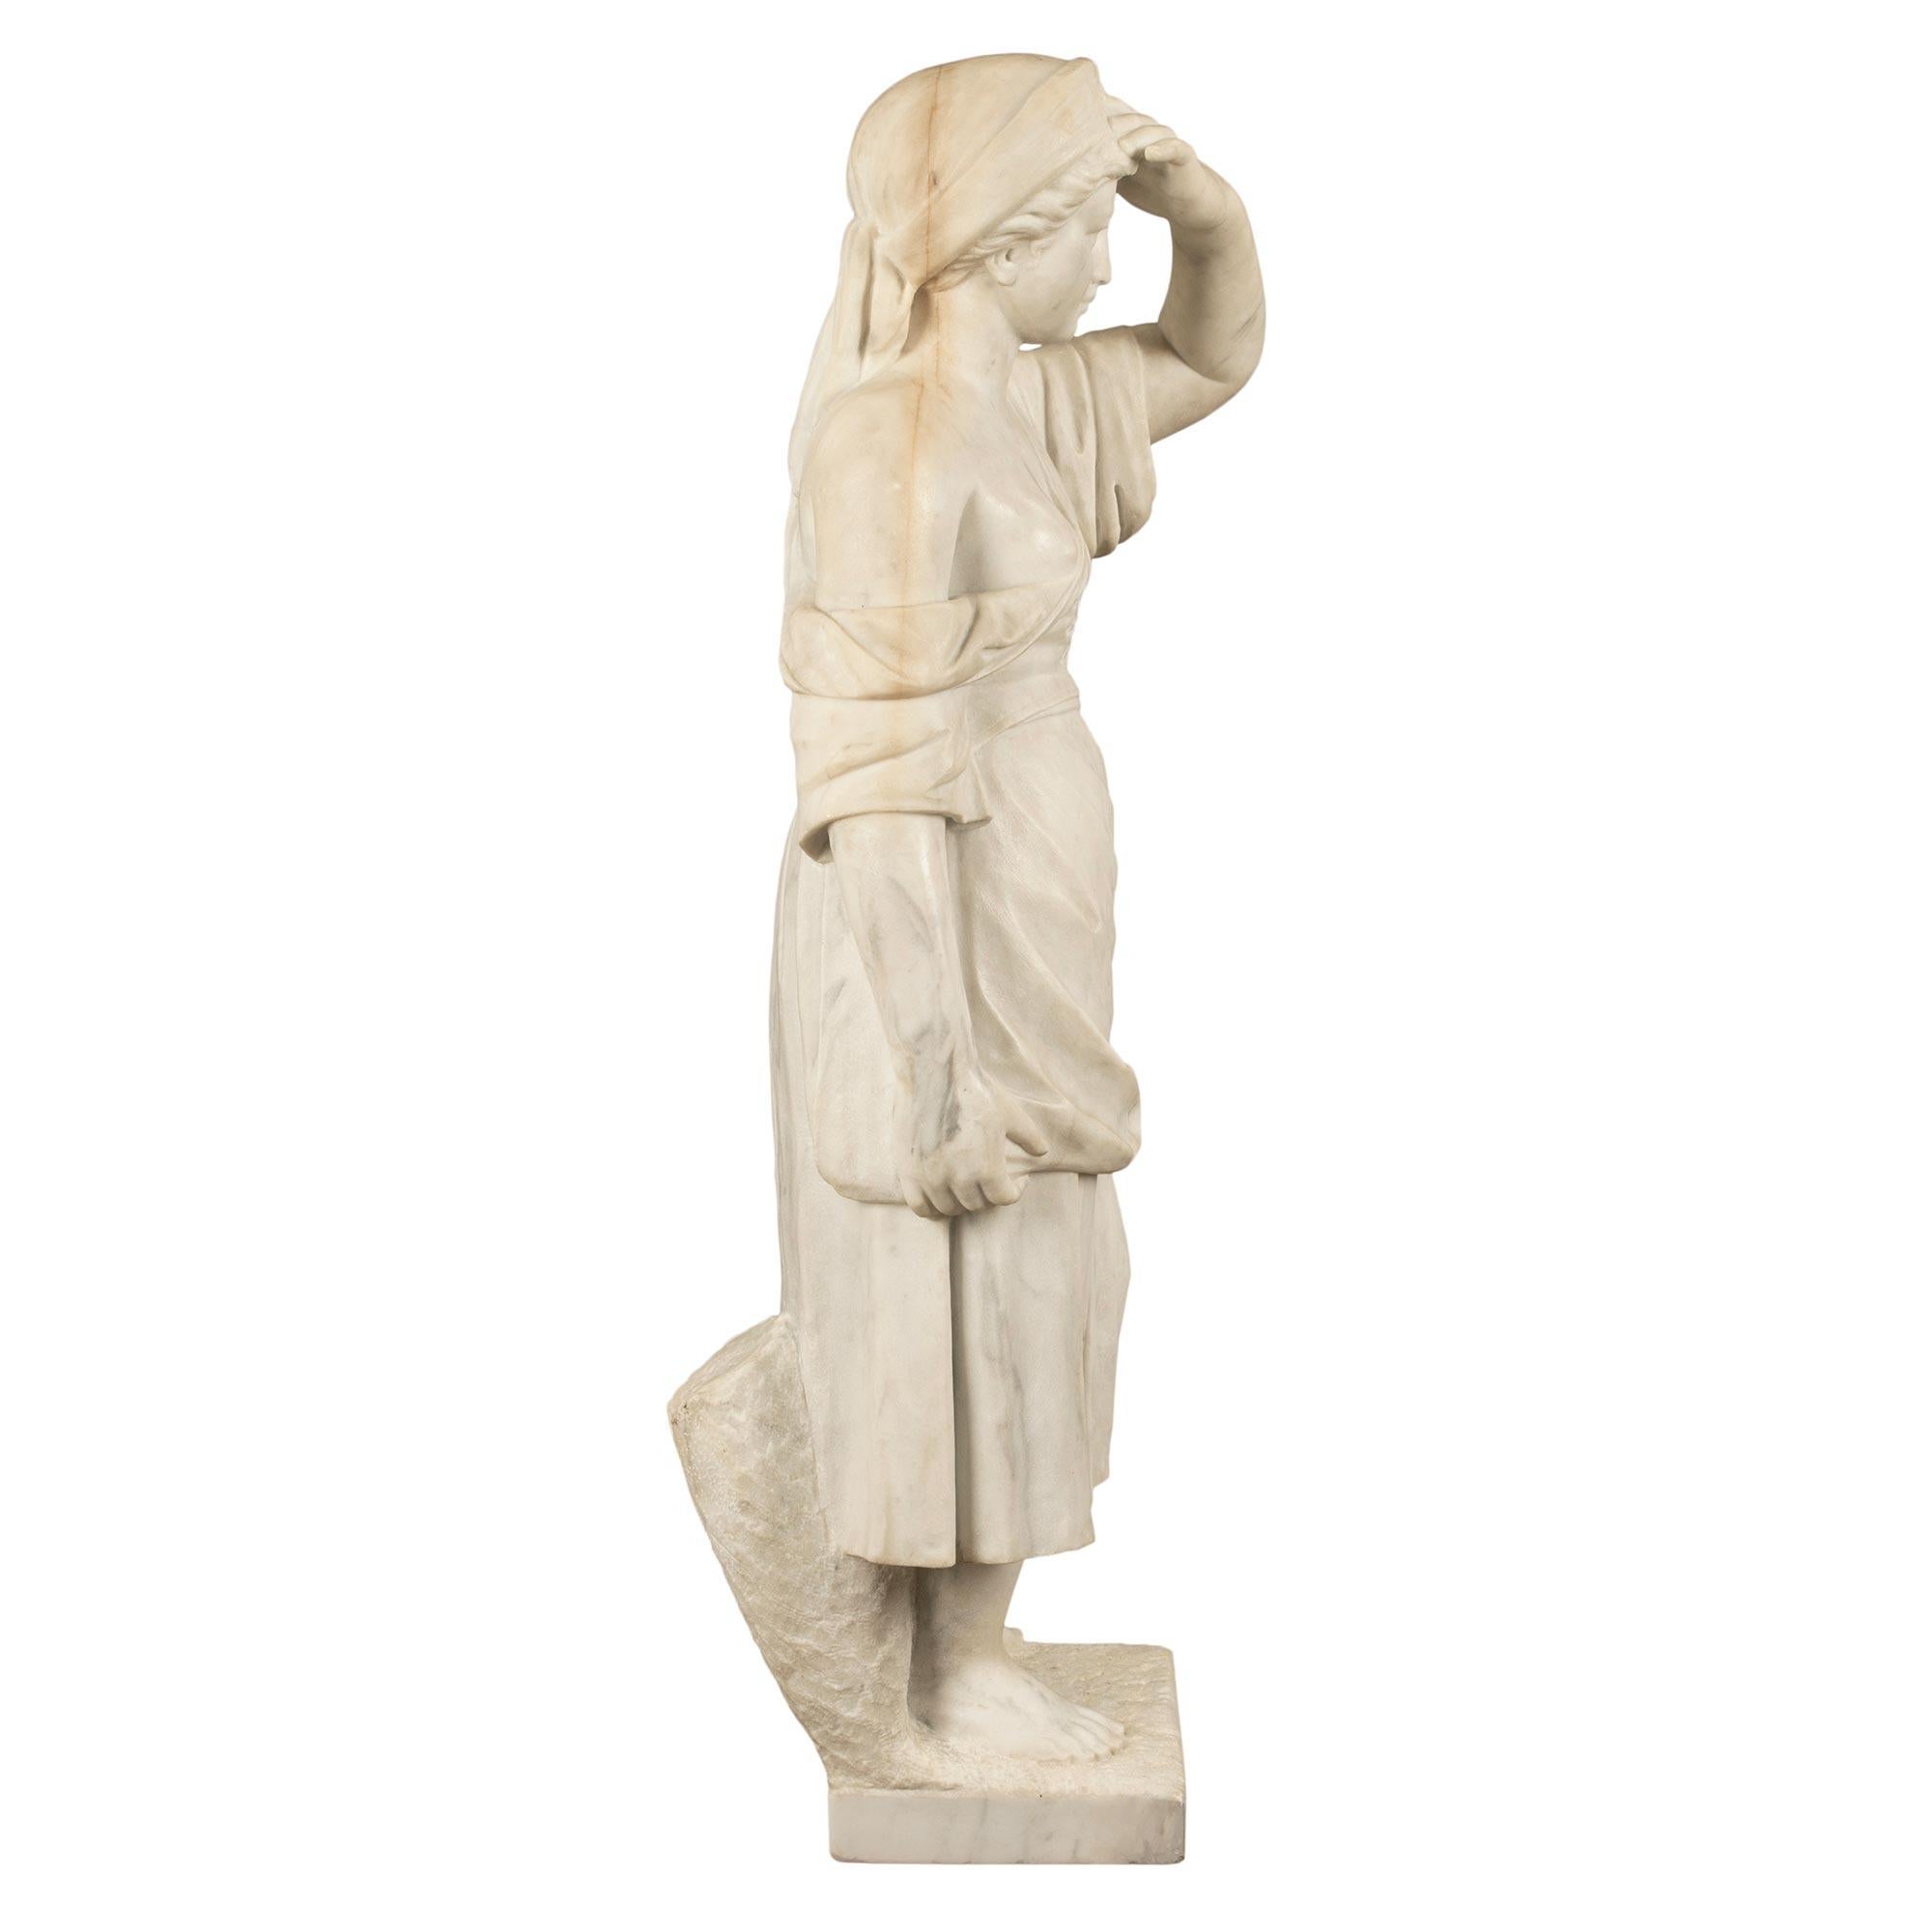 Italian 19th Century White Carrara Marble Statue of a Young Lady In Good Condition For Sale In West Palm Beach, FL